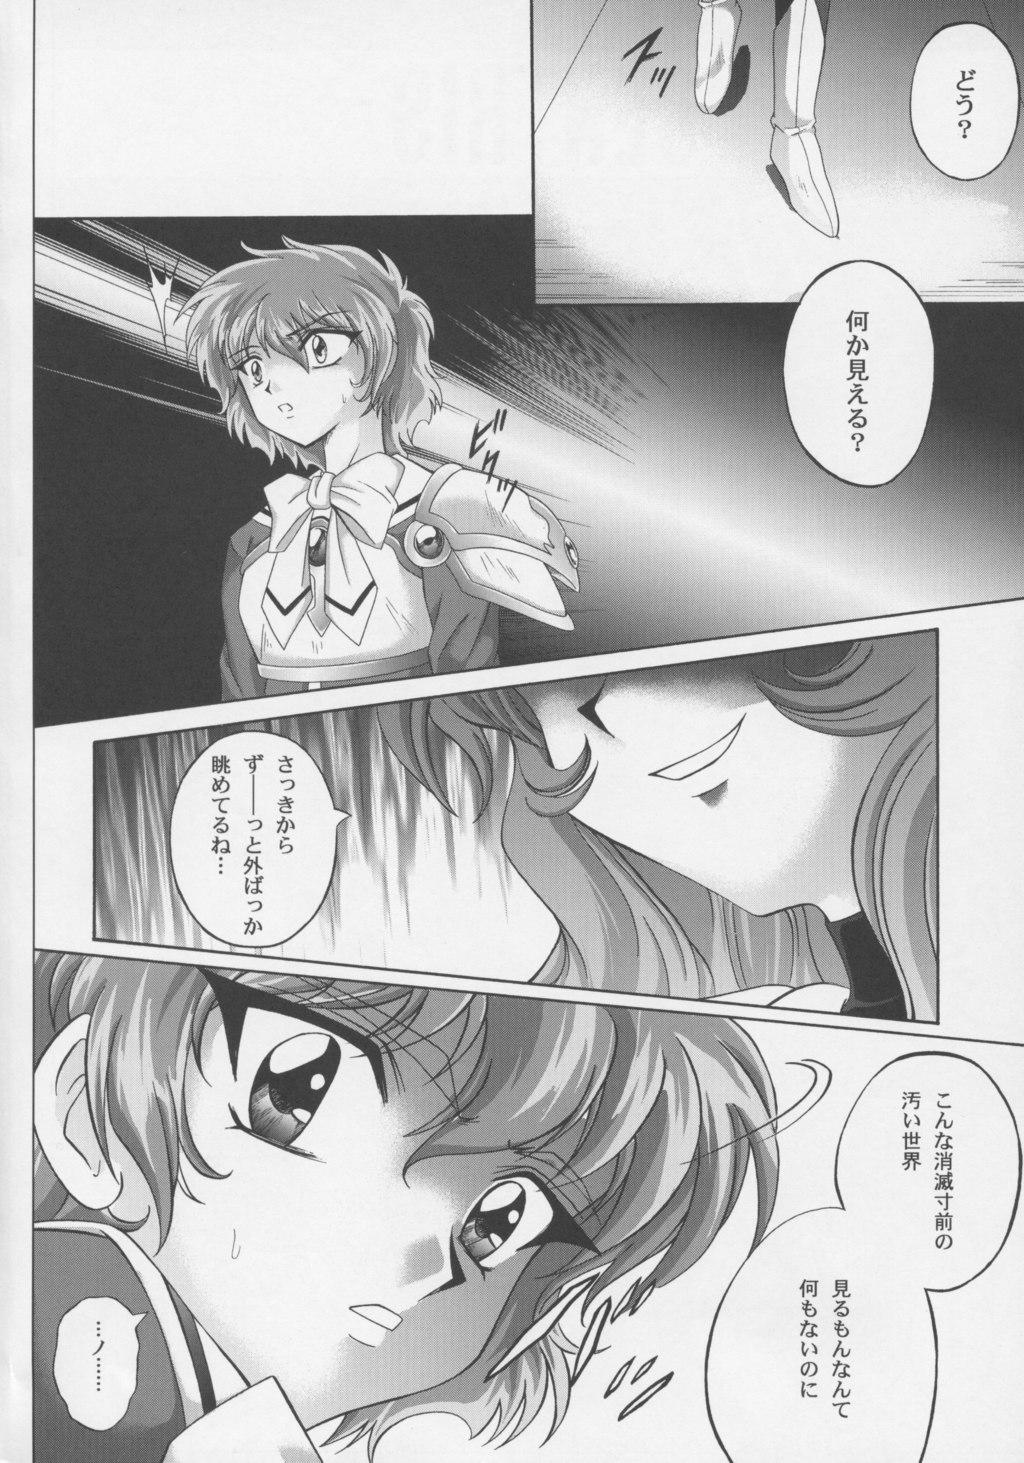 Animation Centris - Magic knight rayearth Pawg - Page 3